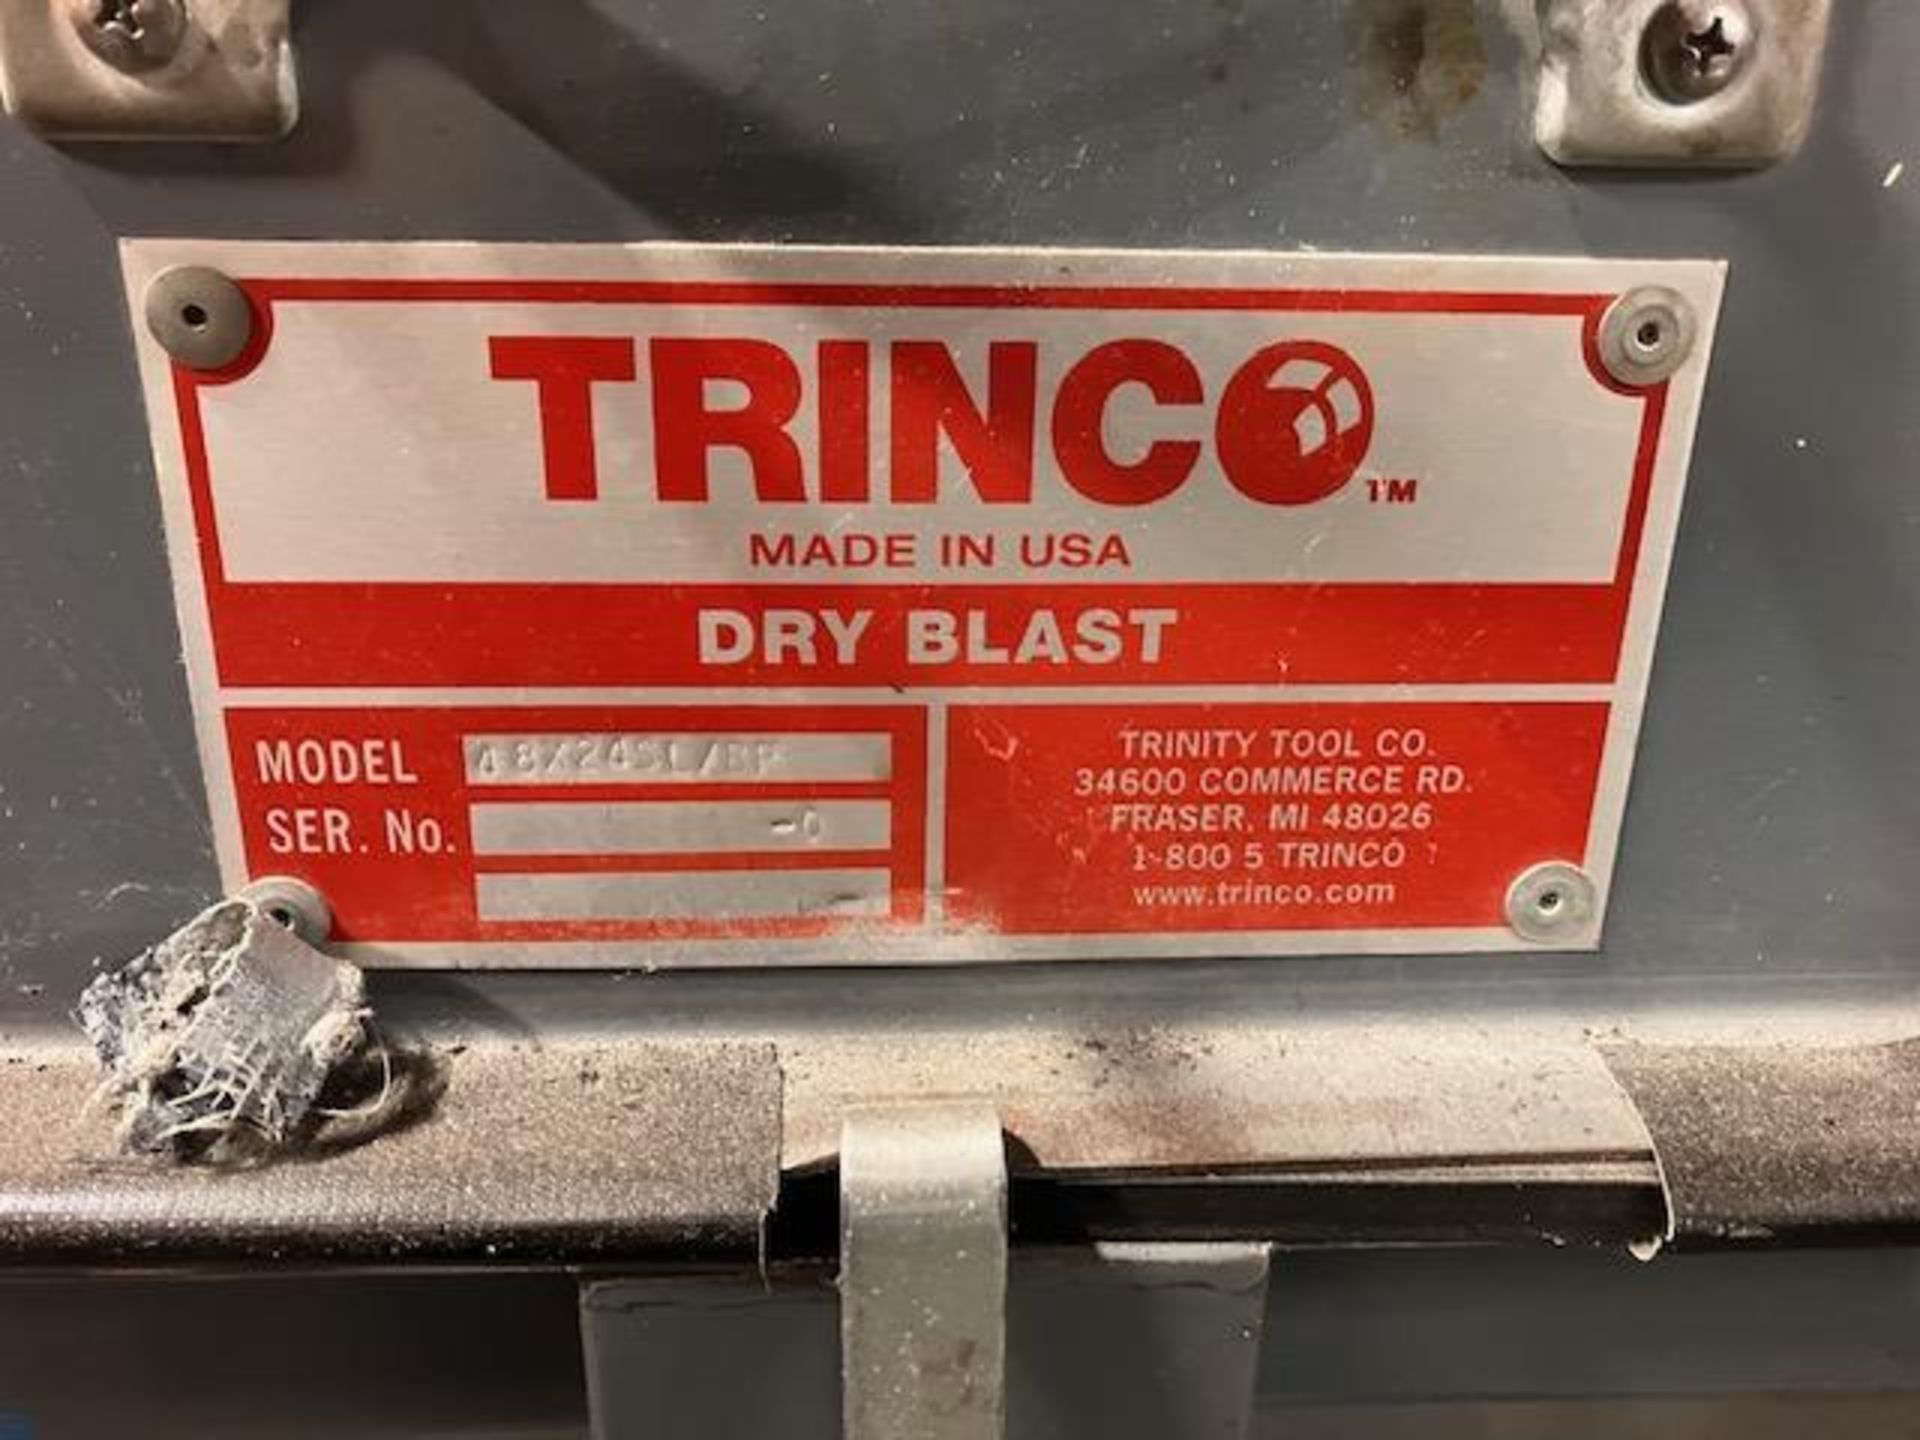 Trinco Dry Blast Cabinet, Model 48X24SL/8P (Location: 1160 E 222nd St, Cleveland, OH 44117) - Image 3 of 8